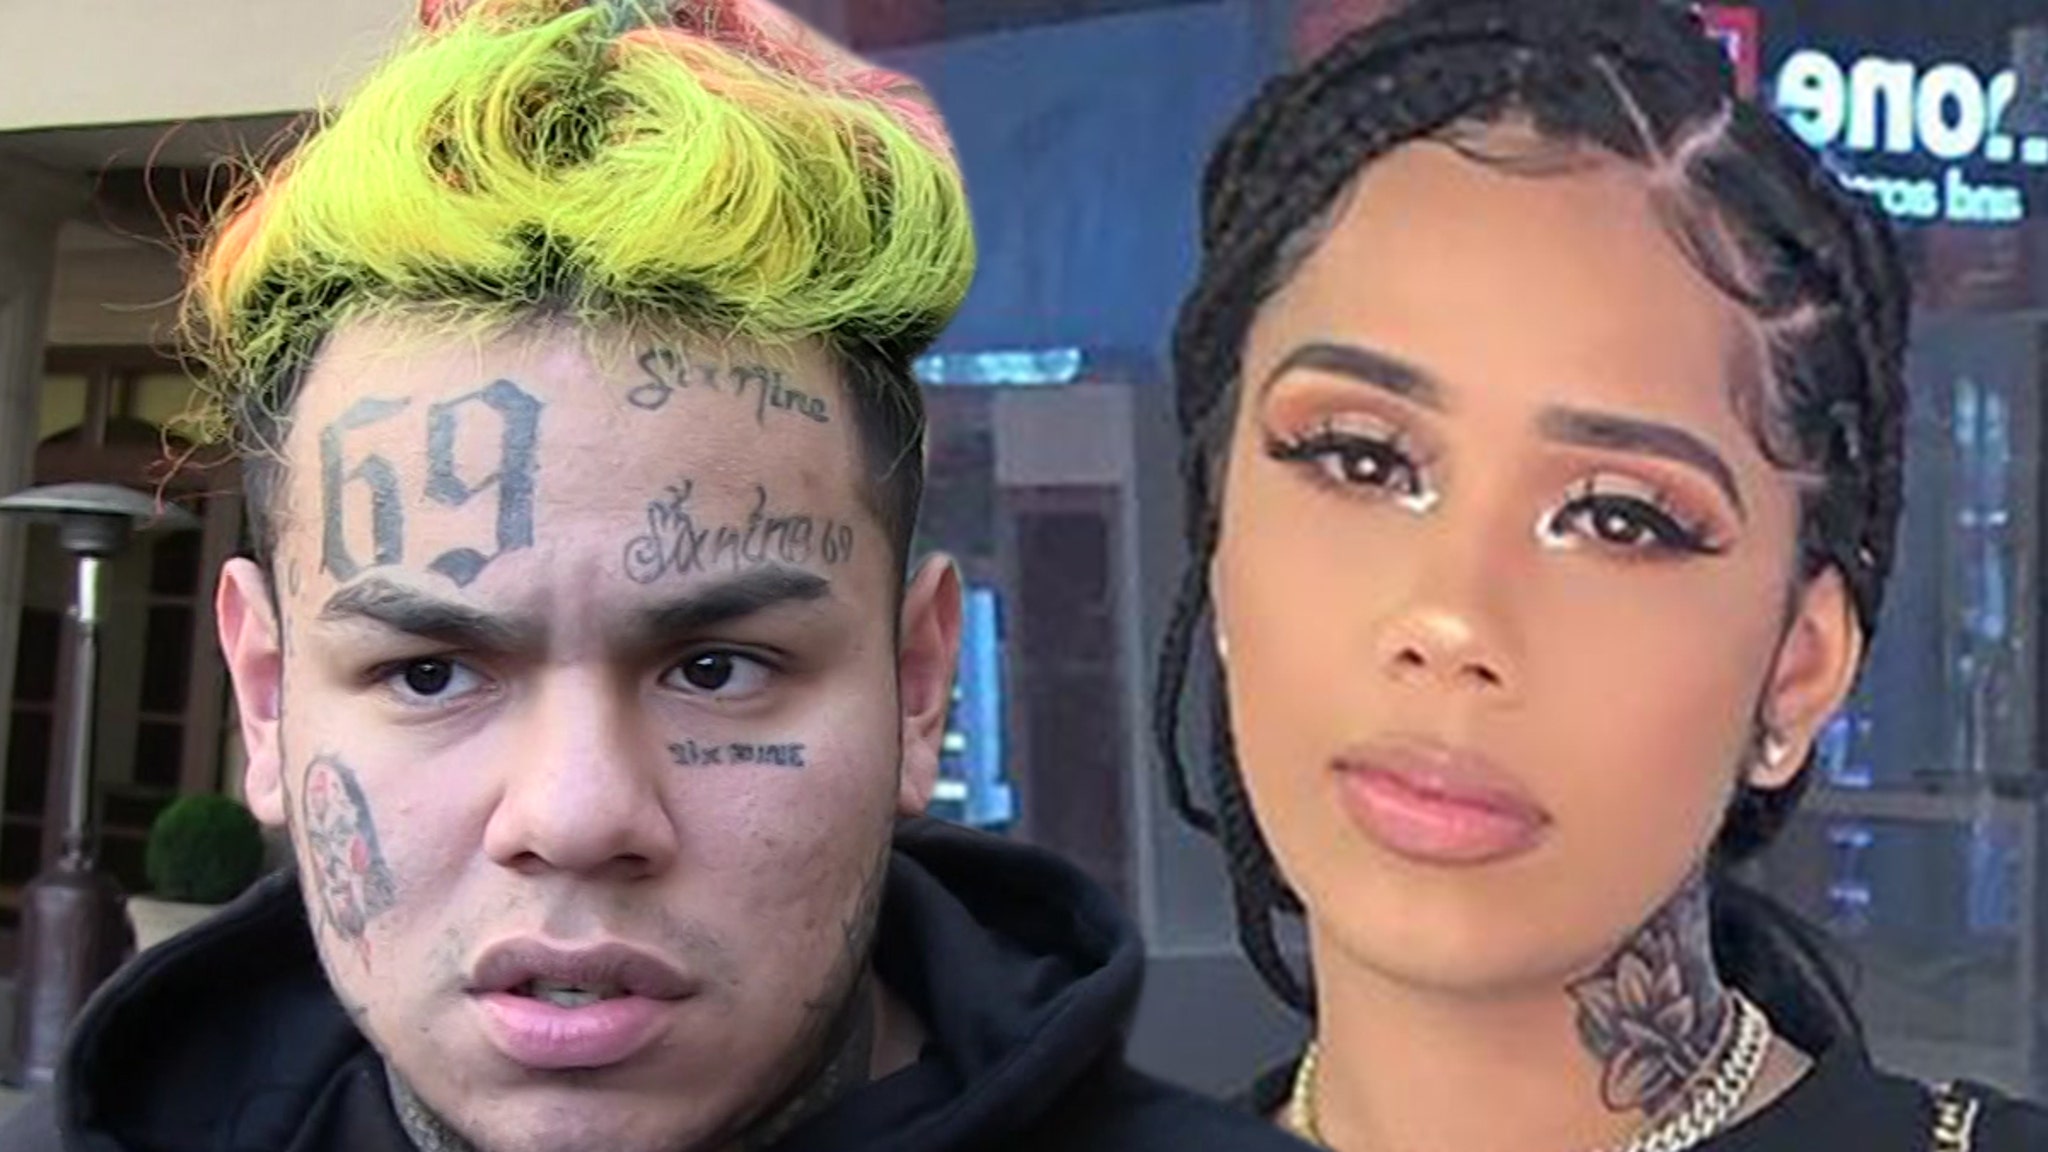 6ix9ine’s baby mama fears that her meat will endanger her daughter